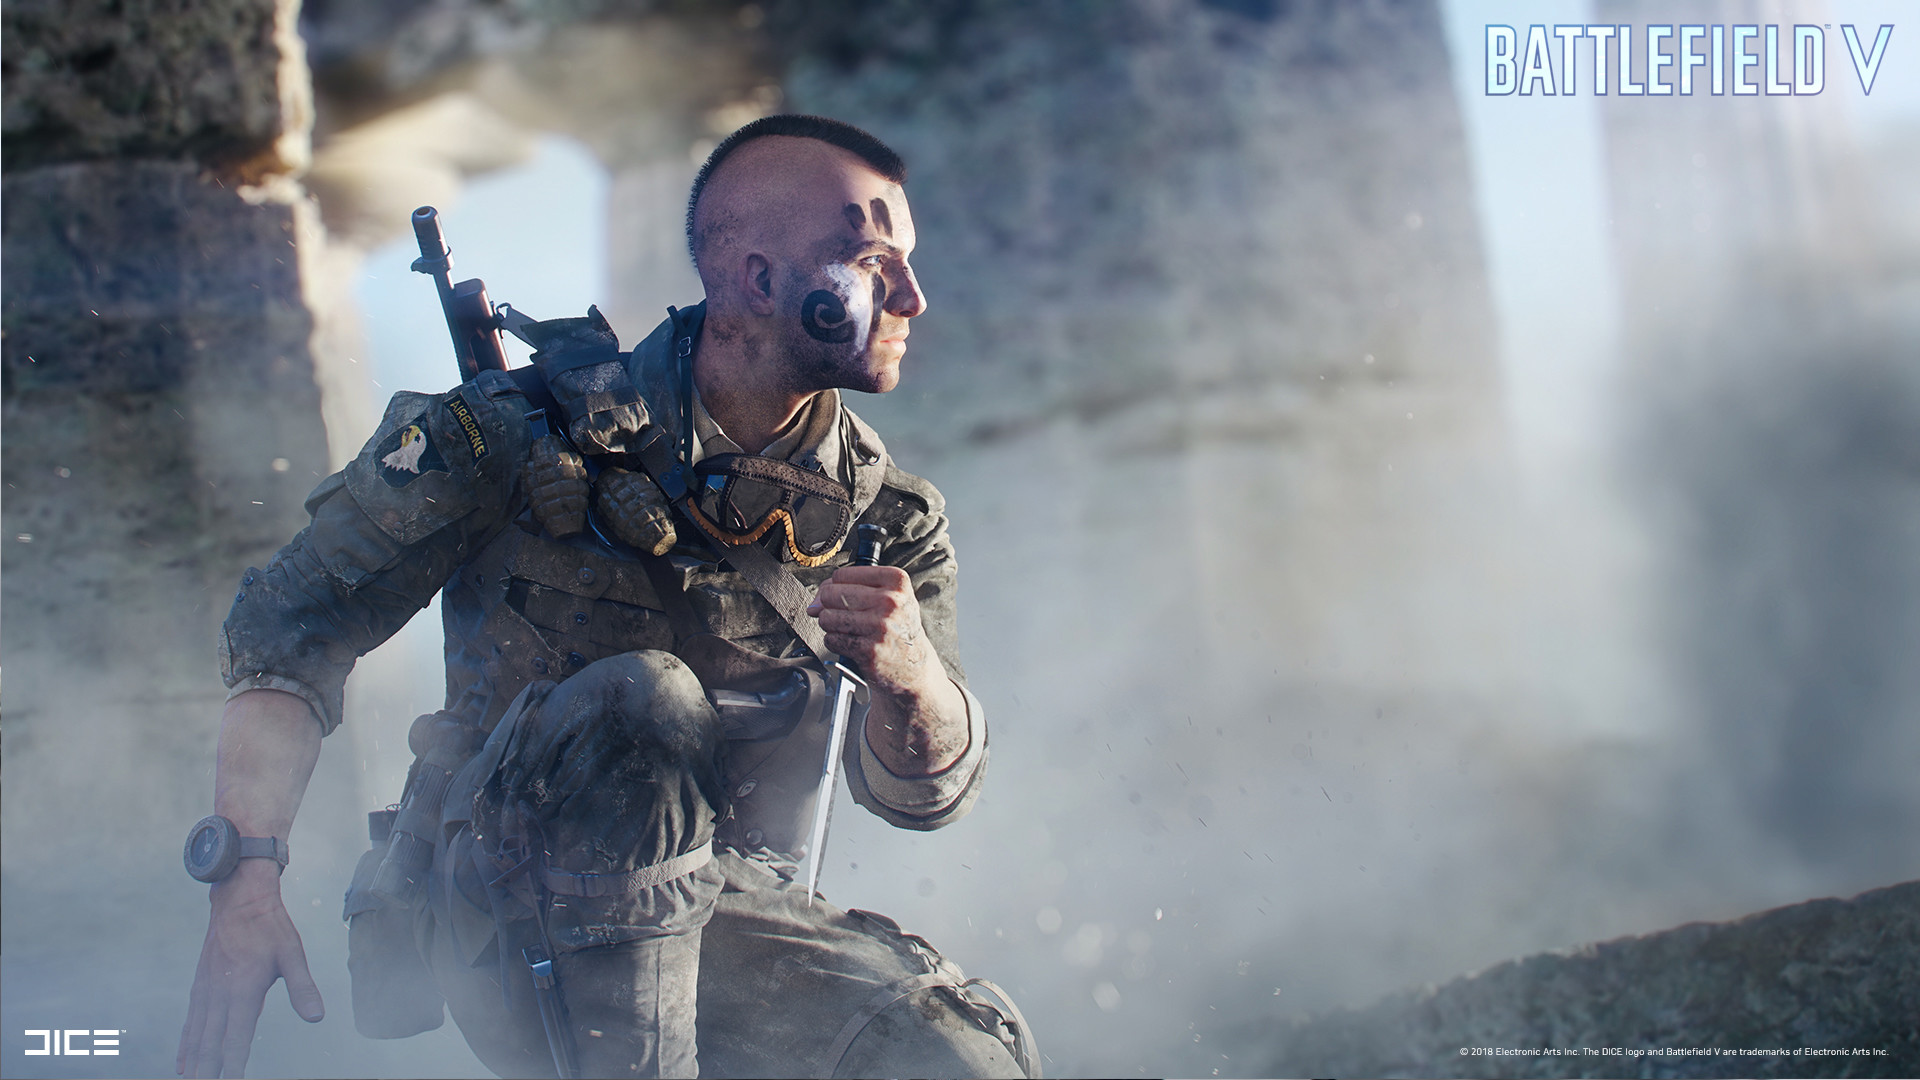 Battlefield 5’s New US Elite Character Is A Hardened Airborne Soldier And Demolition Expert